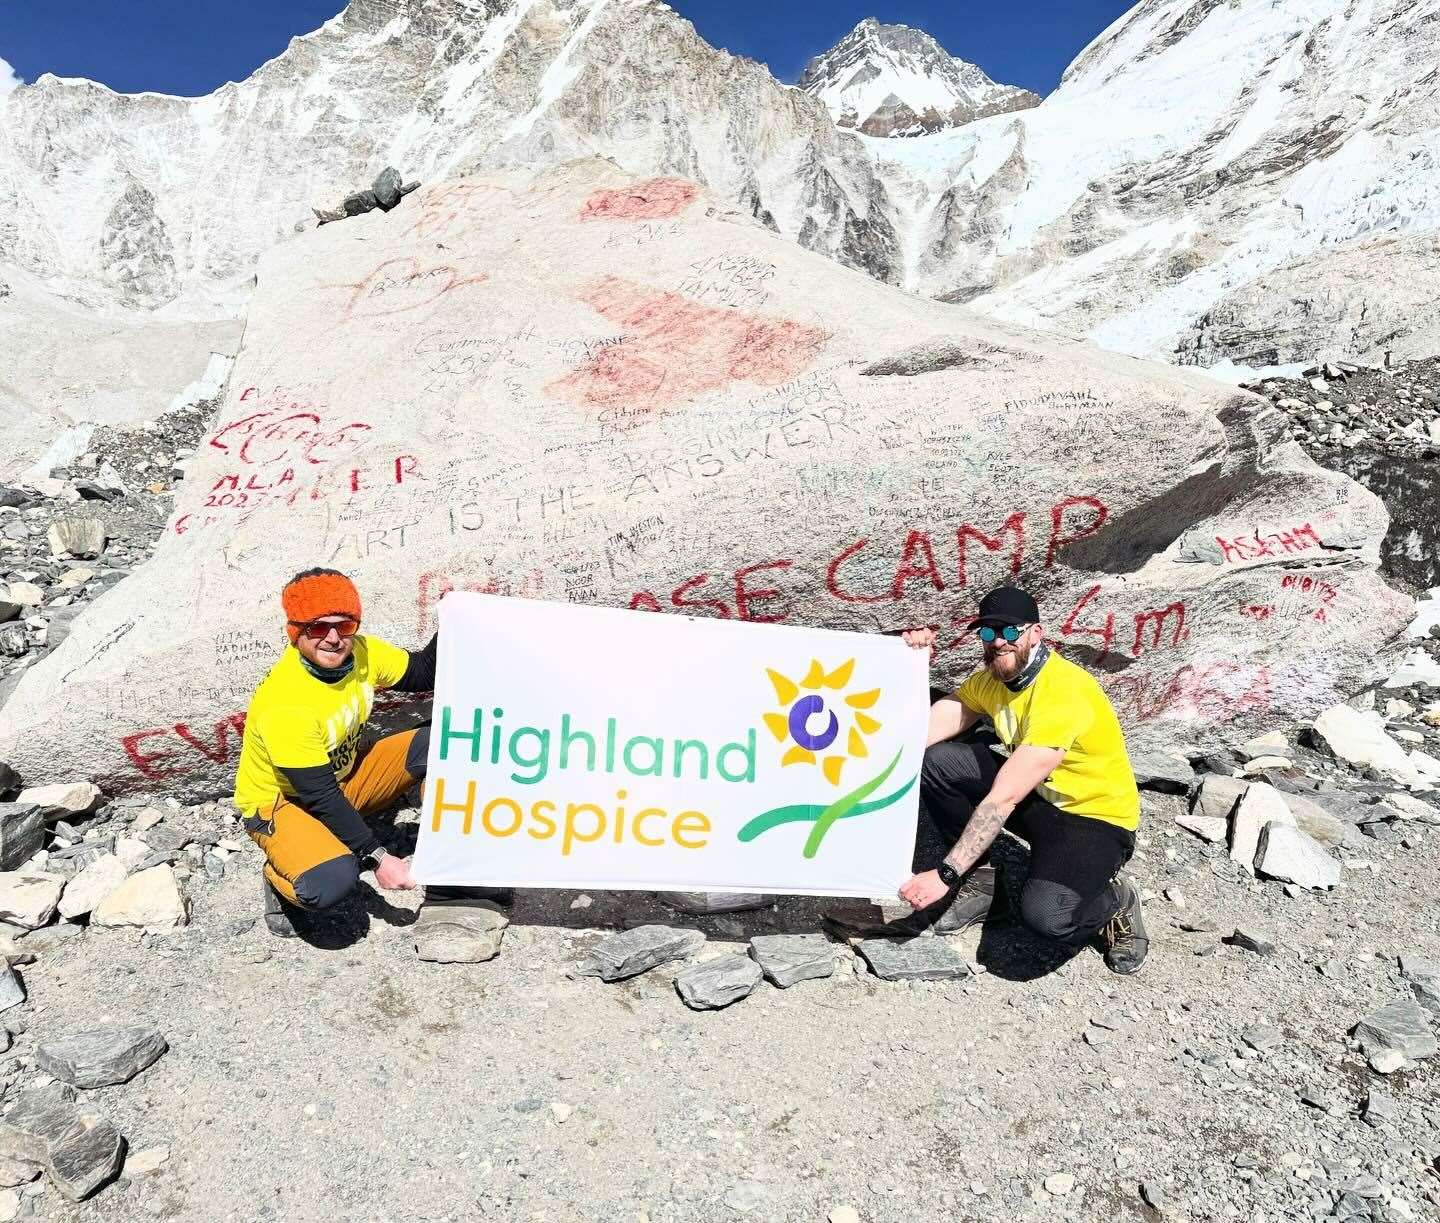 David and Ryan unfurl the Highland Hospice banner after completing their base camp mission